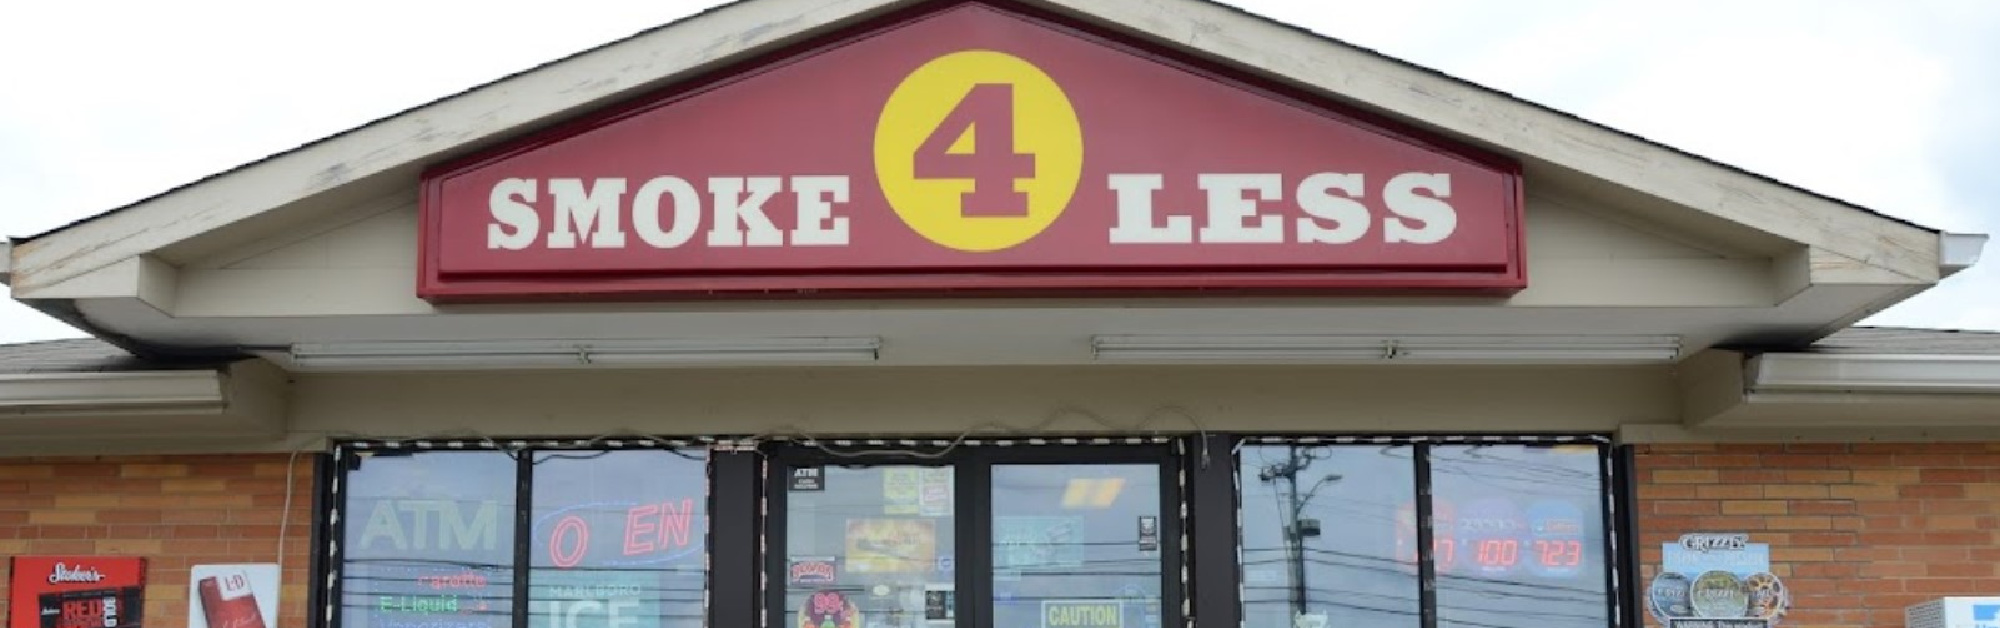 image of smoke 4 less in clarksville tn